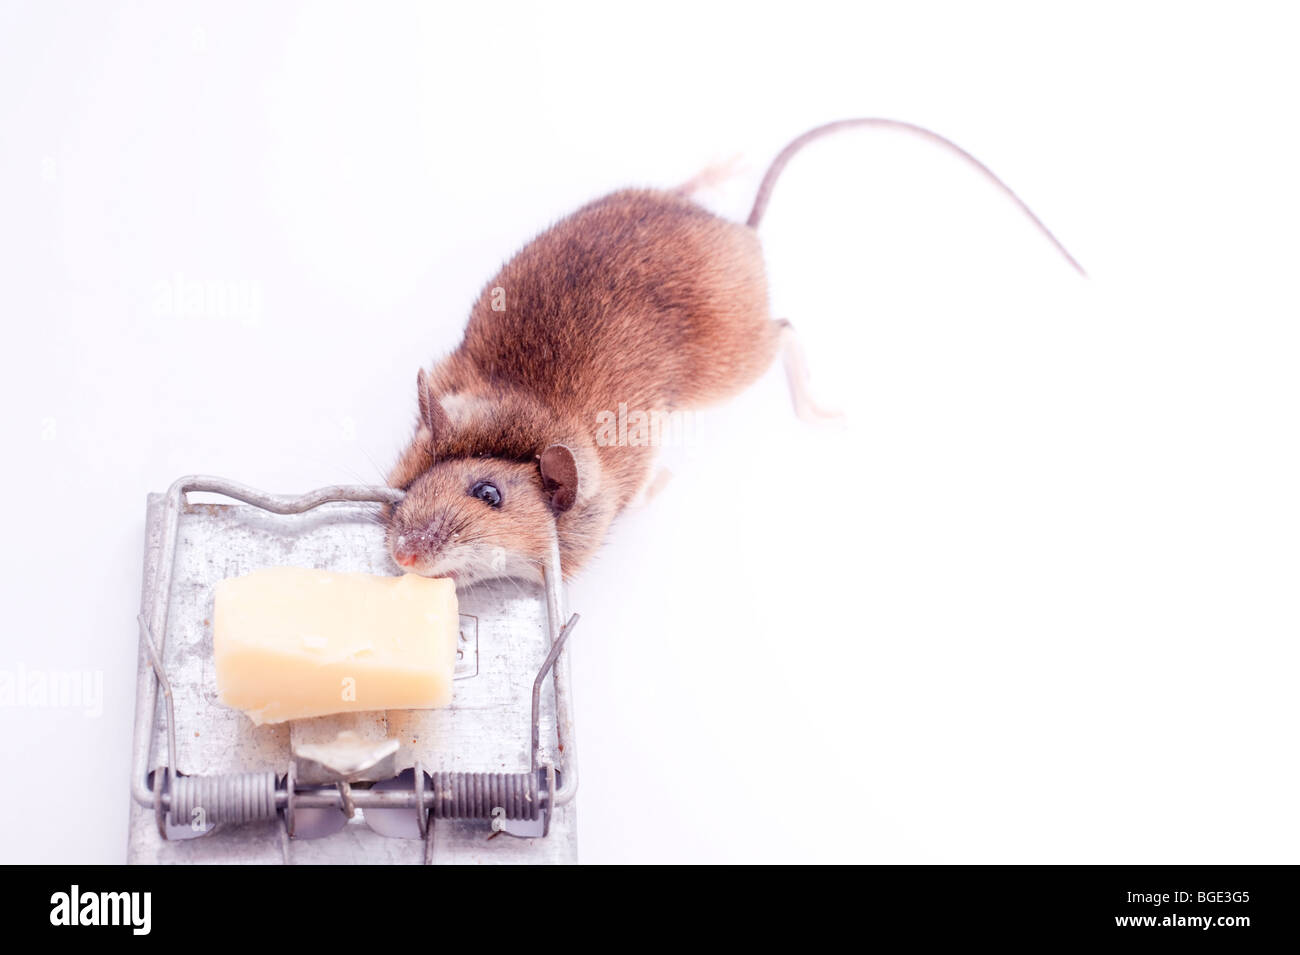 https://c8.alamy.com/comp/BGE3G5/a-dead-mouse-after-having-been-caught-in-a-mouse-trap-on-a-white-background-BGE3G5.jpg